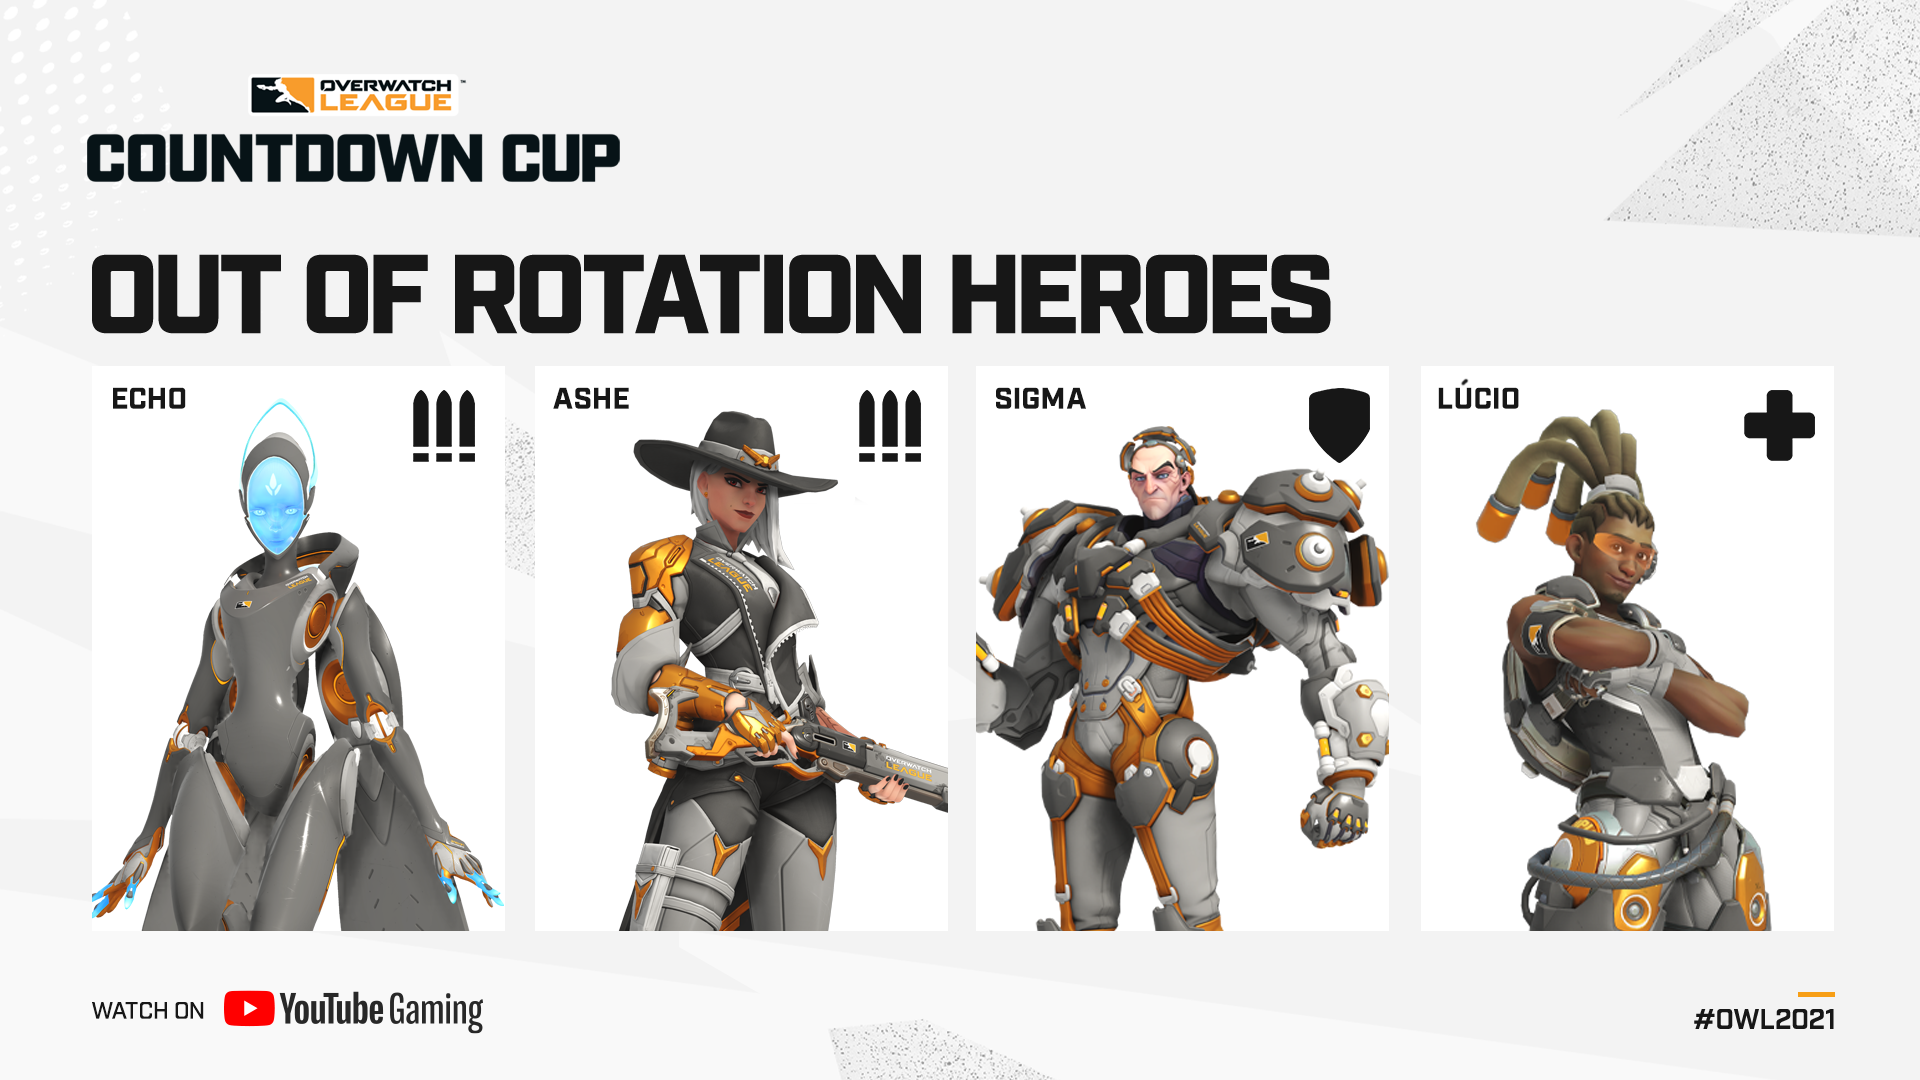 Countdown Cup Details Playoff Information, Hero Pool, and More The Overwatch League